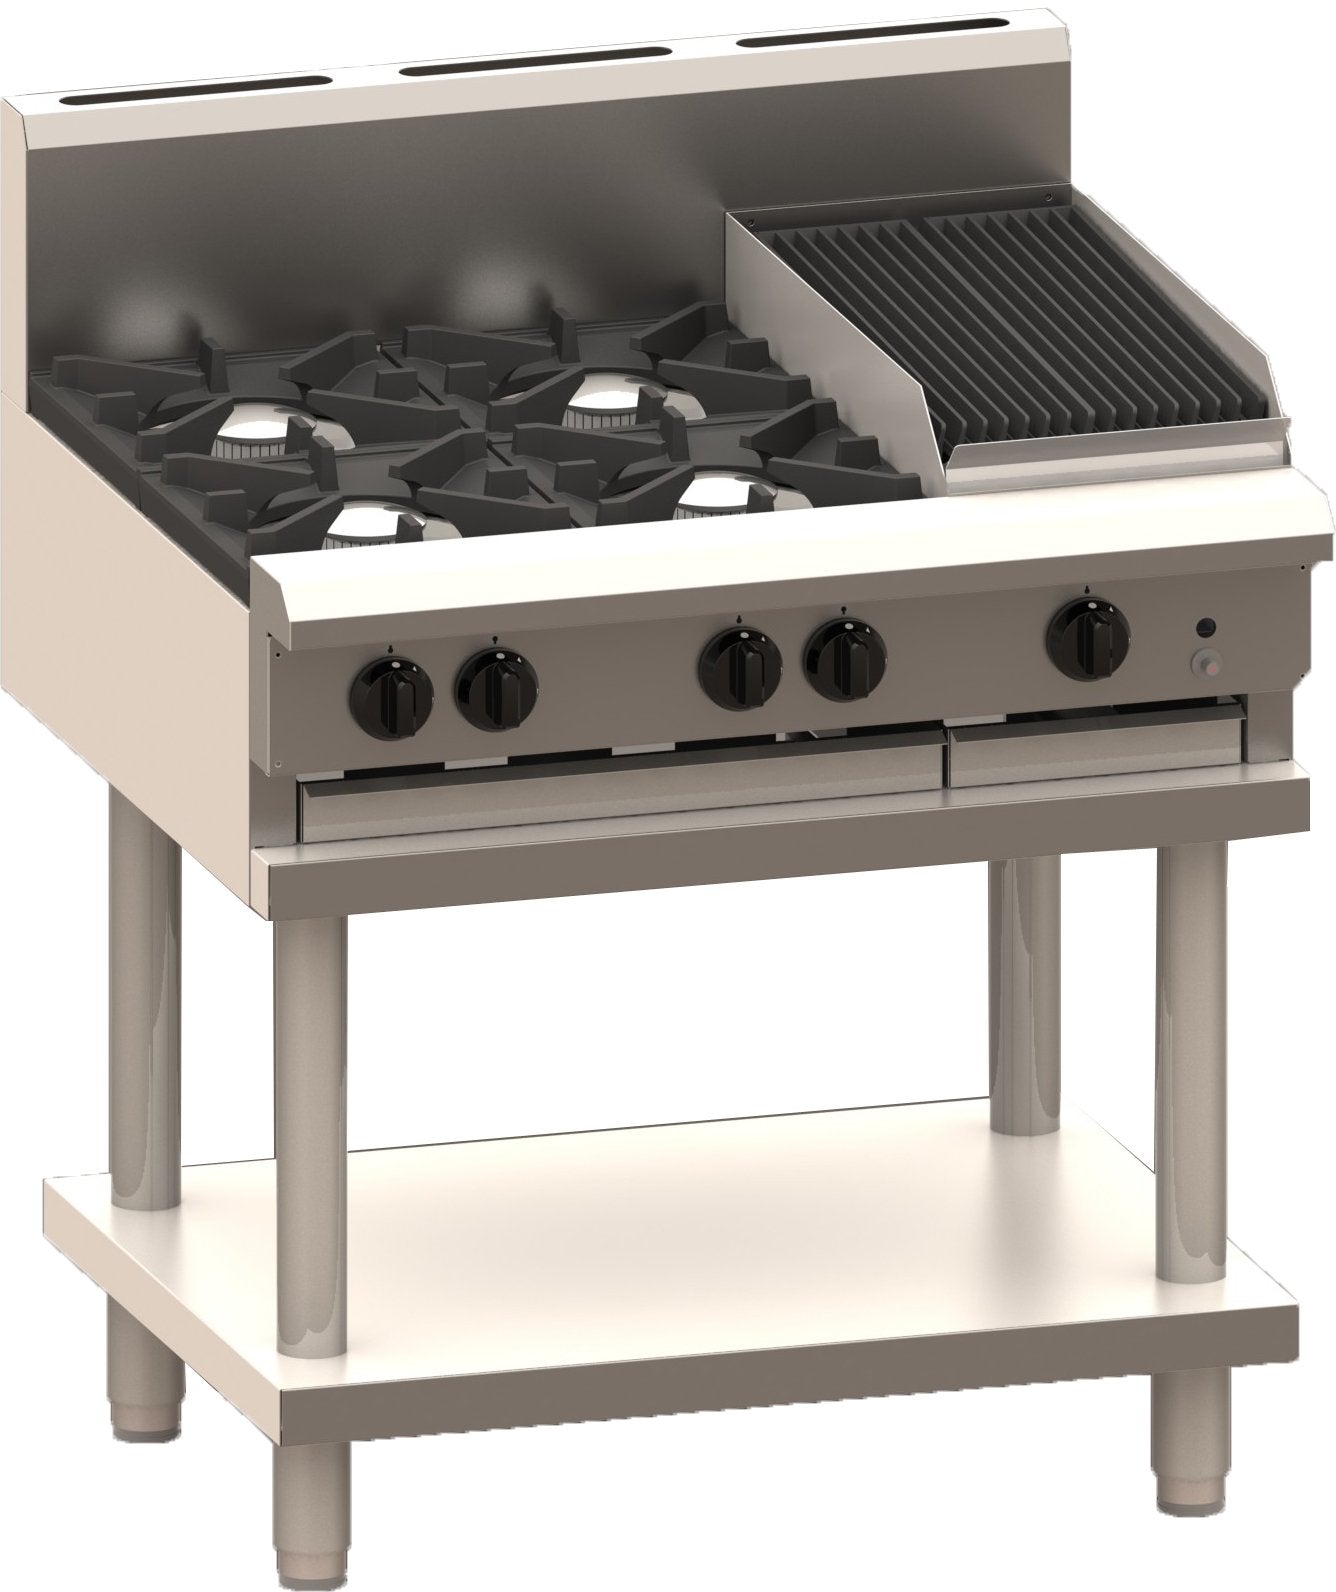 Cooktop & Chargrill Combinations